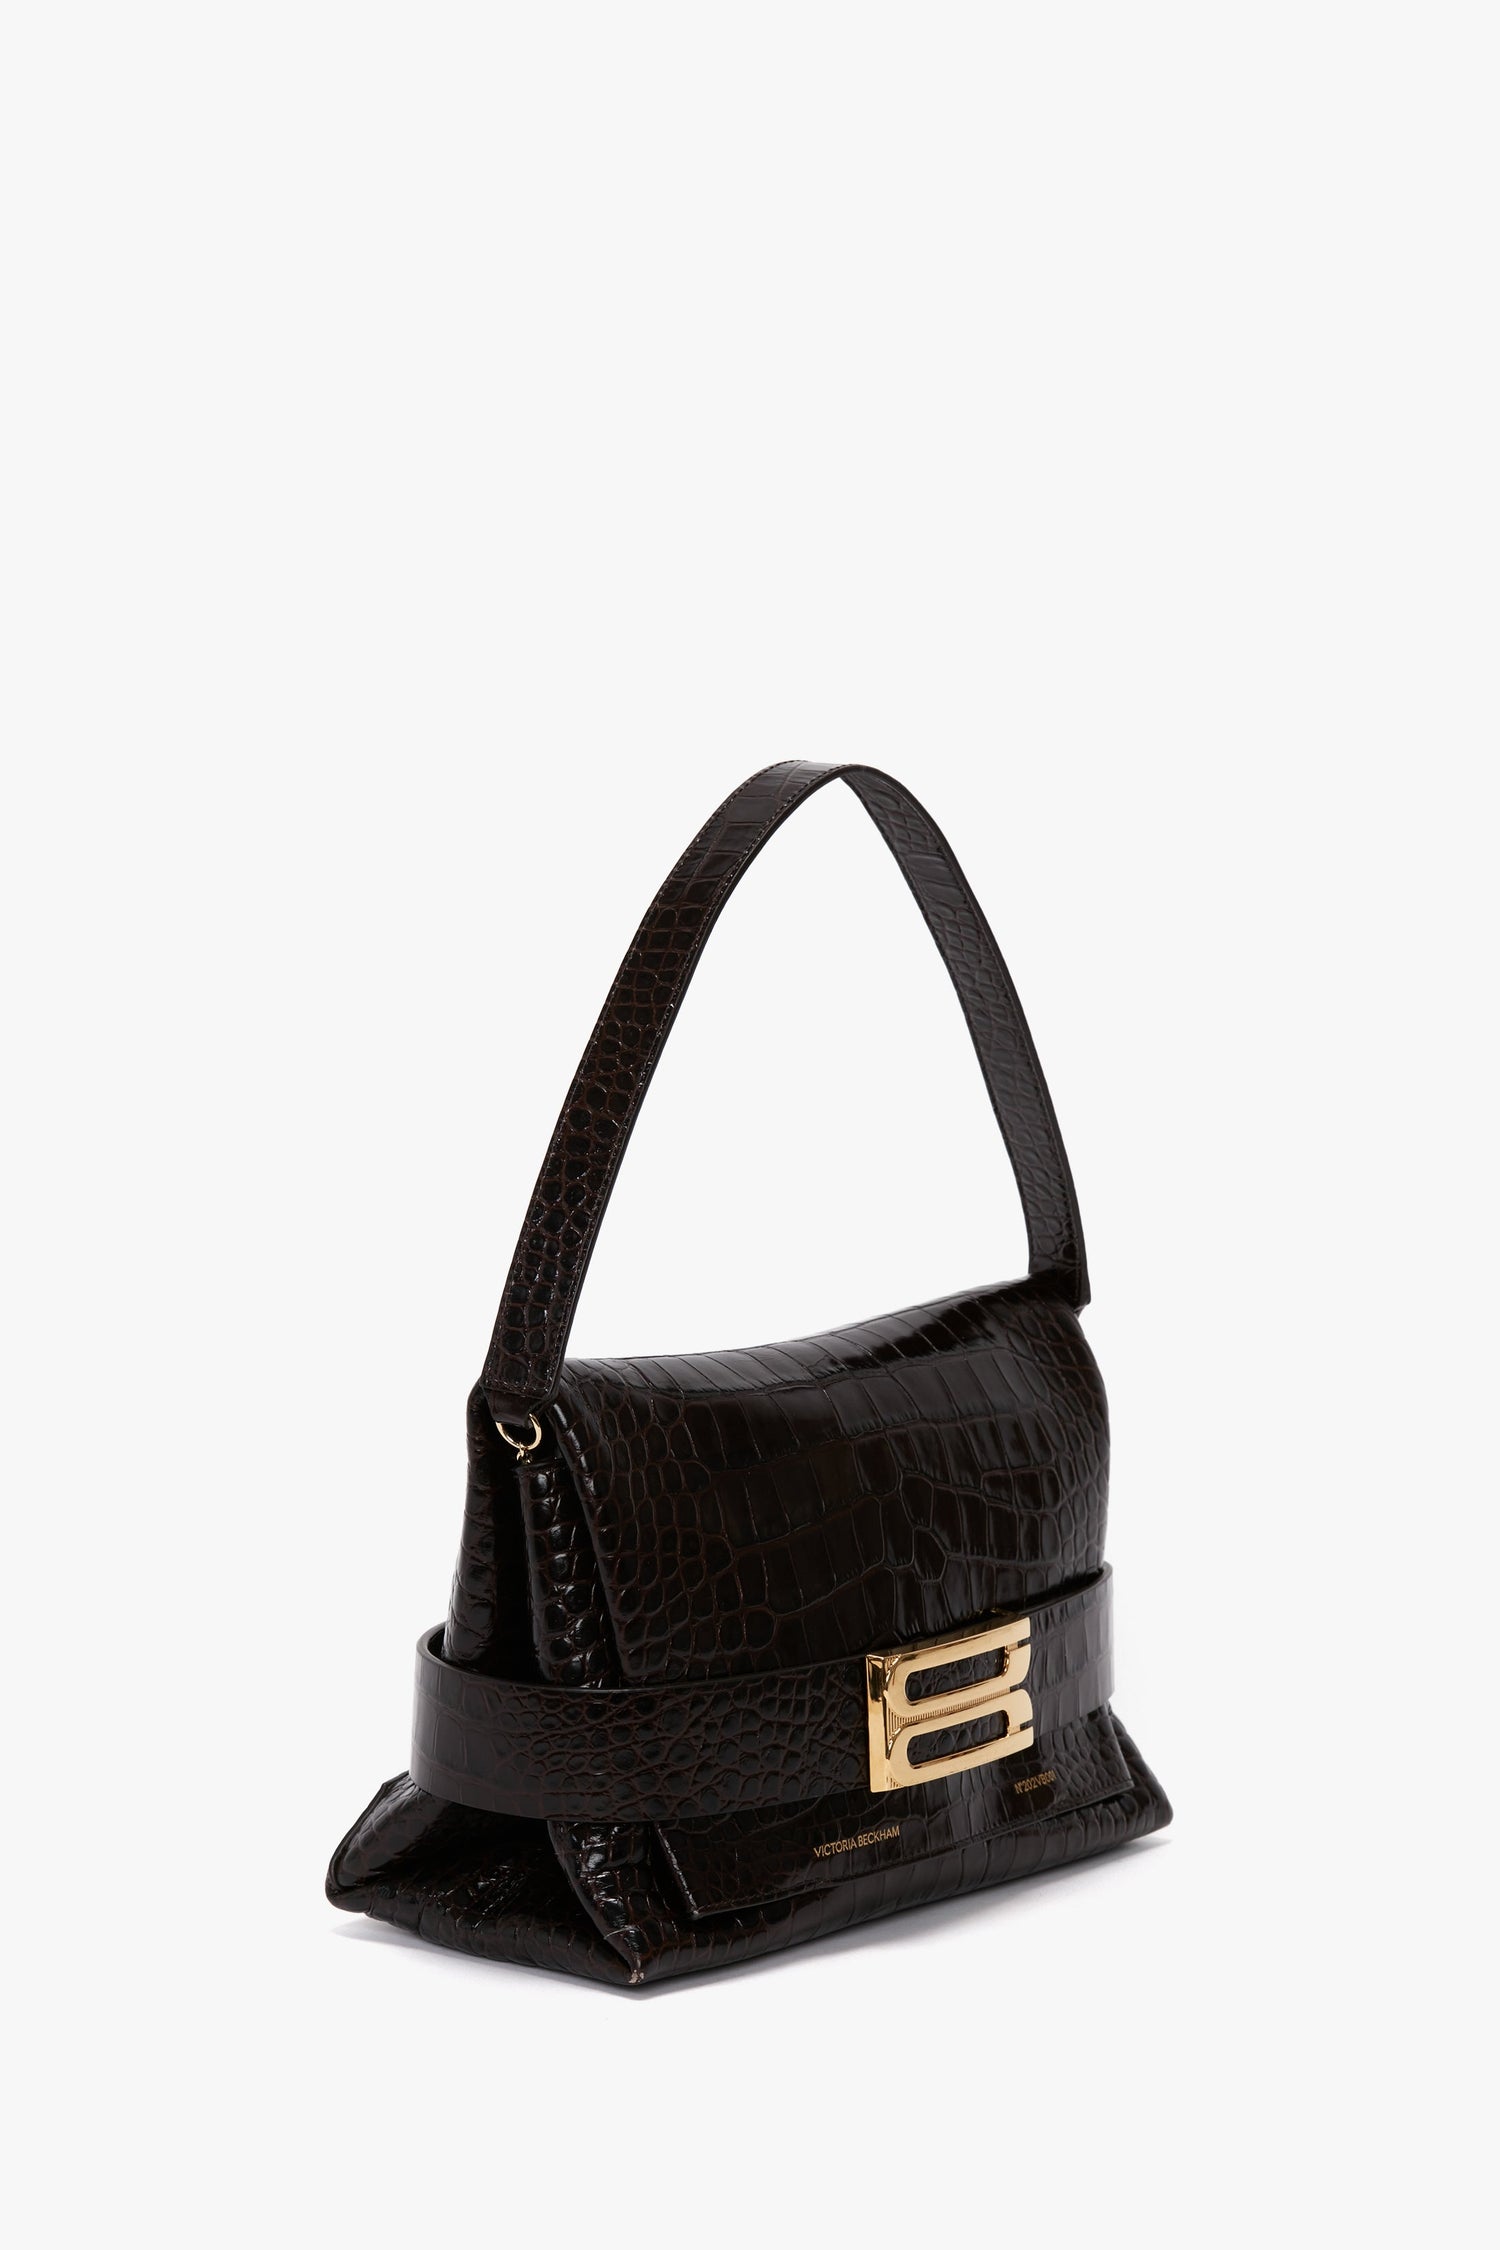 Victoria Beckham B Pouch Bag In Croc Effect Espresso Leather with an embossed crocodile print, gold clasp, and a single shoulder strap.